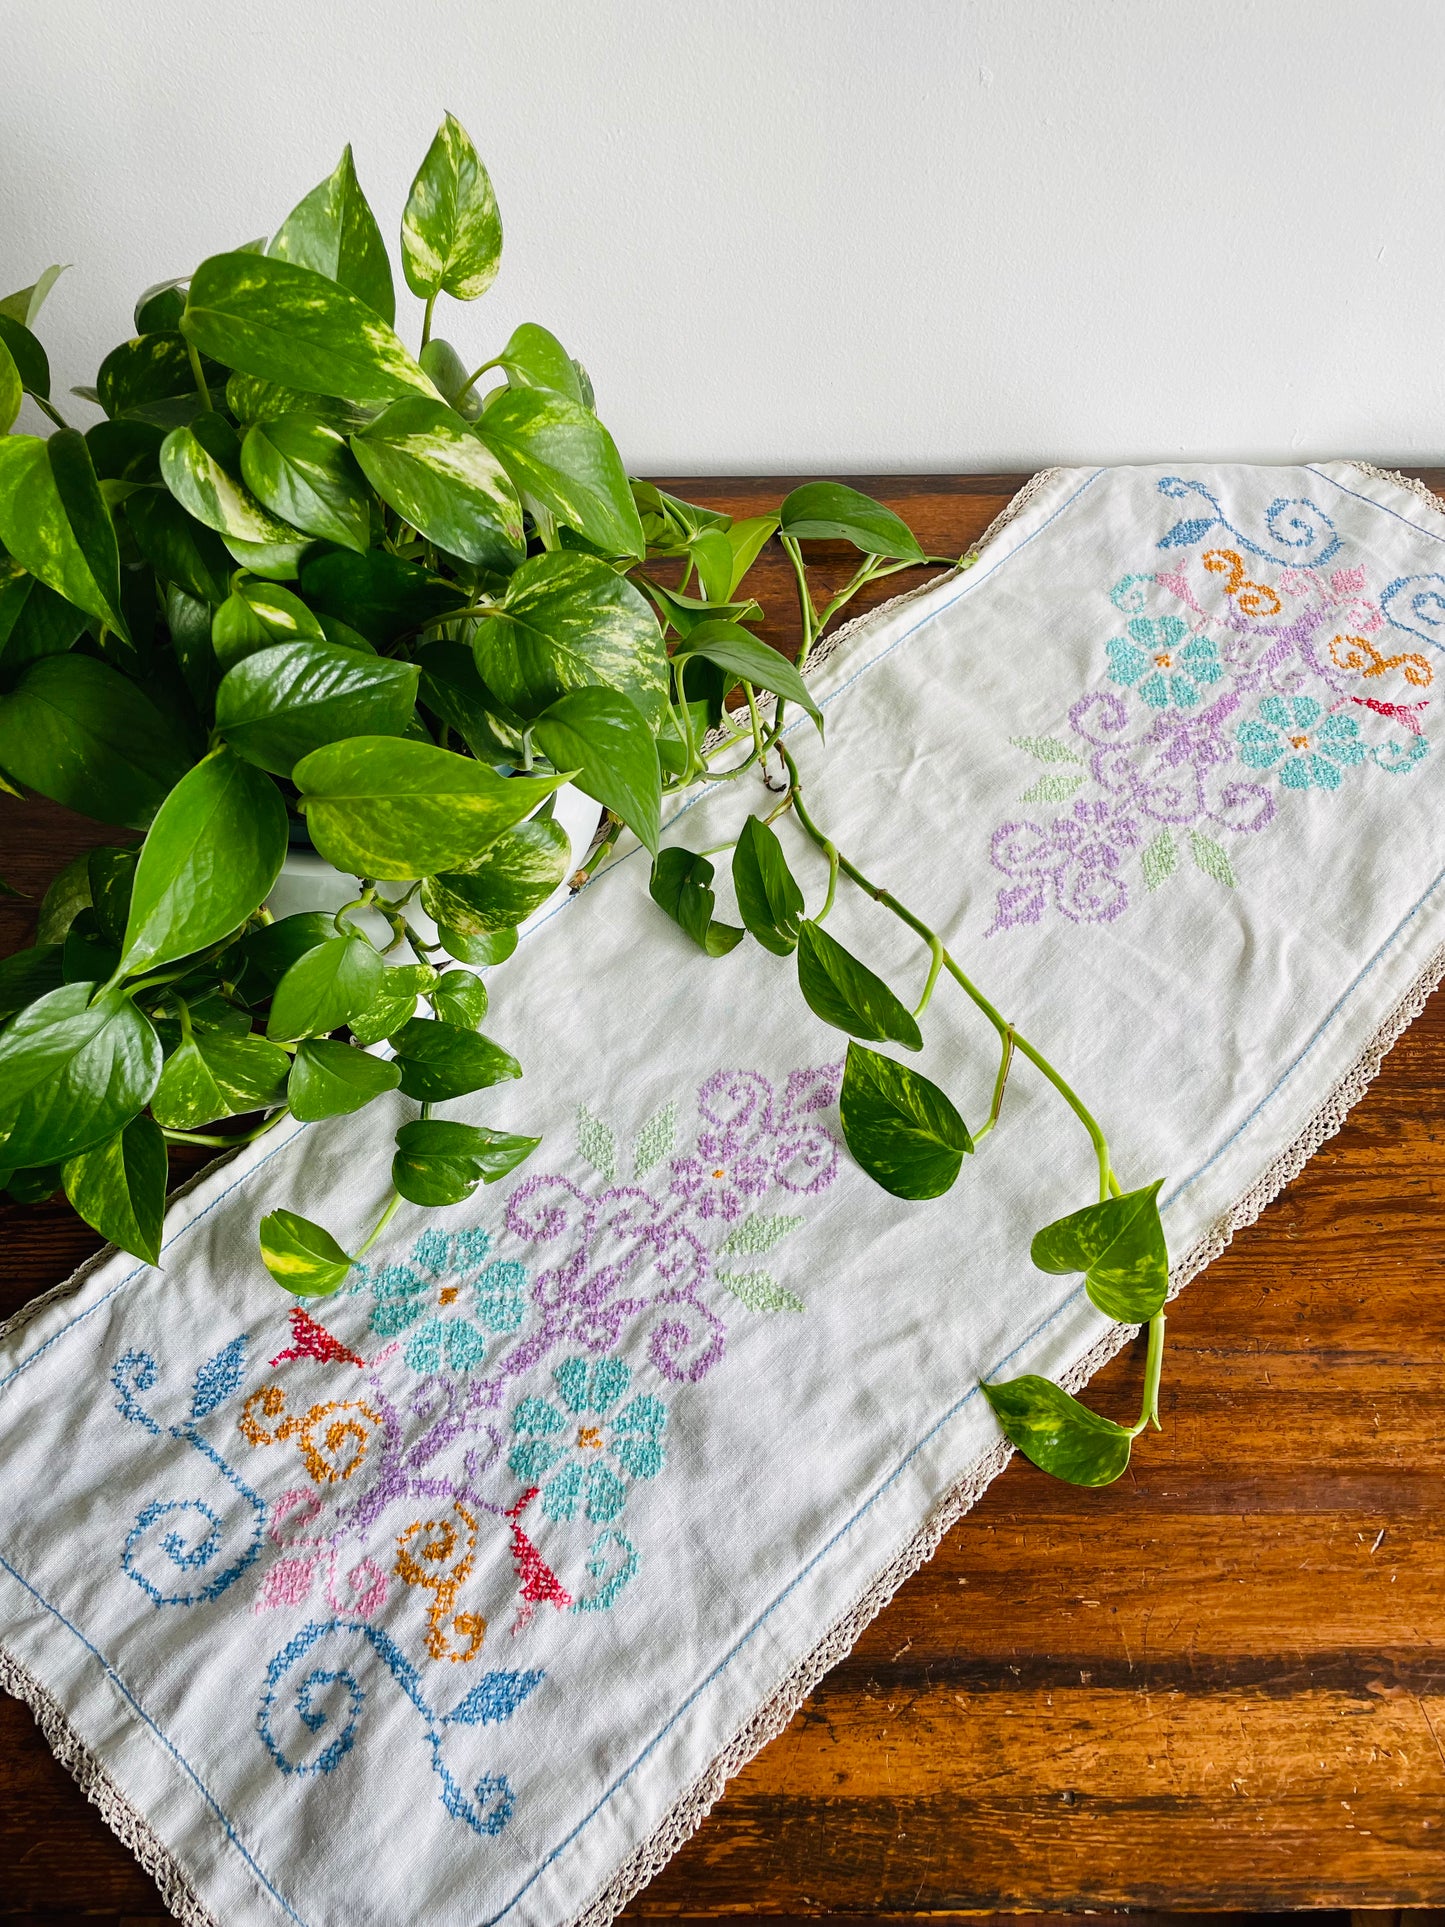 Linen Table Runner or Display Towel with Embroidered Floral Design